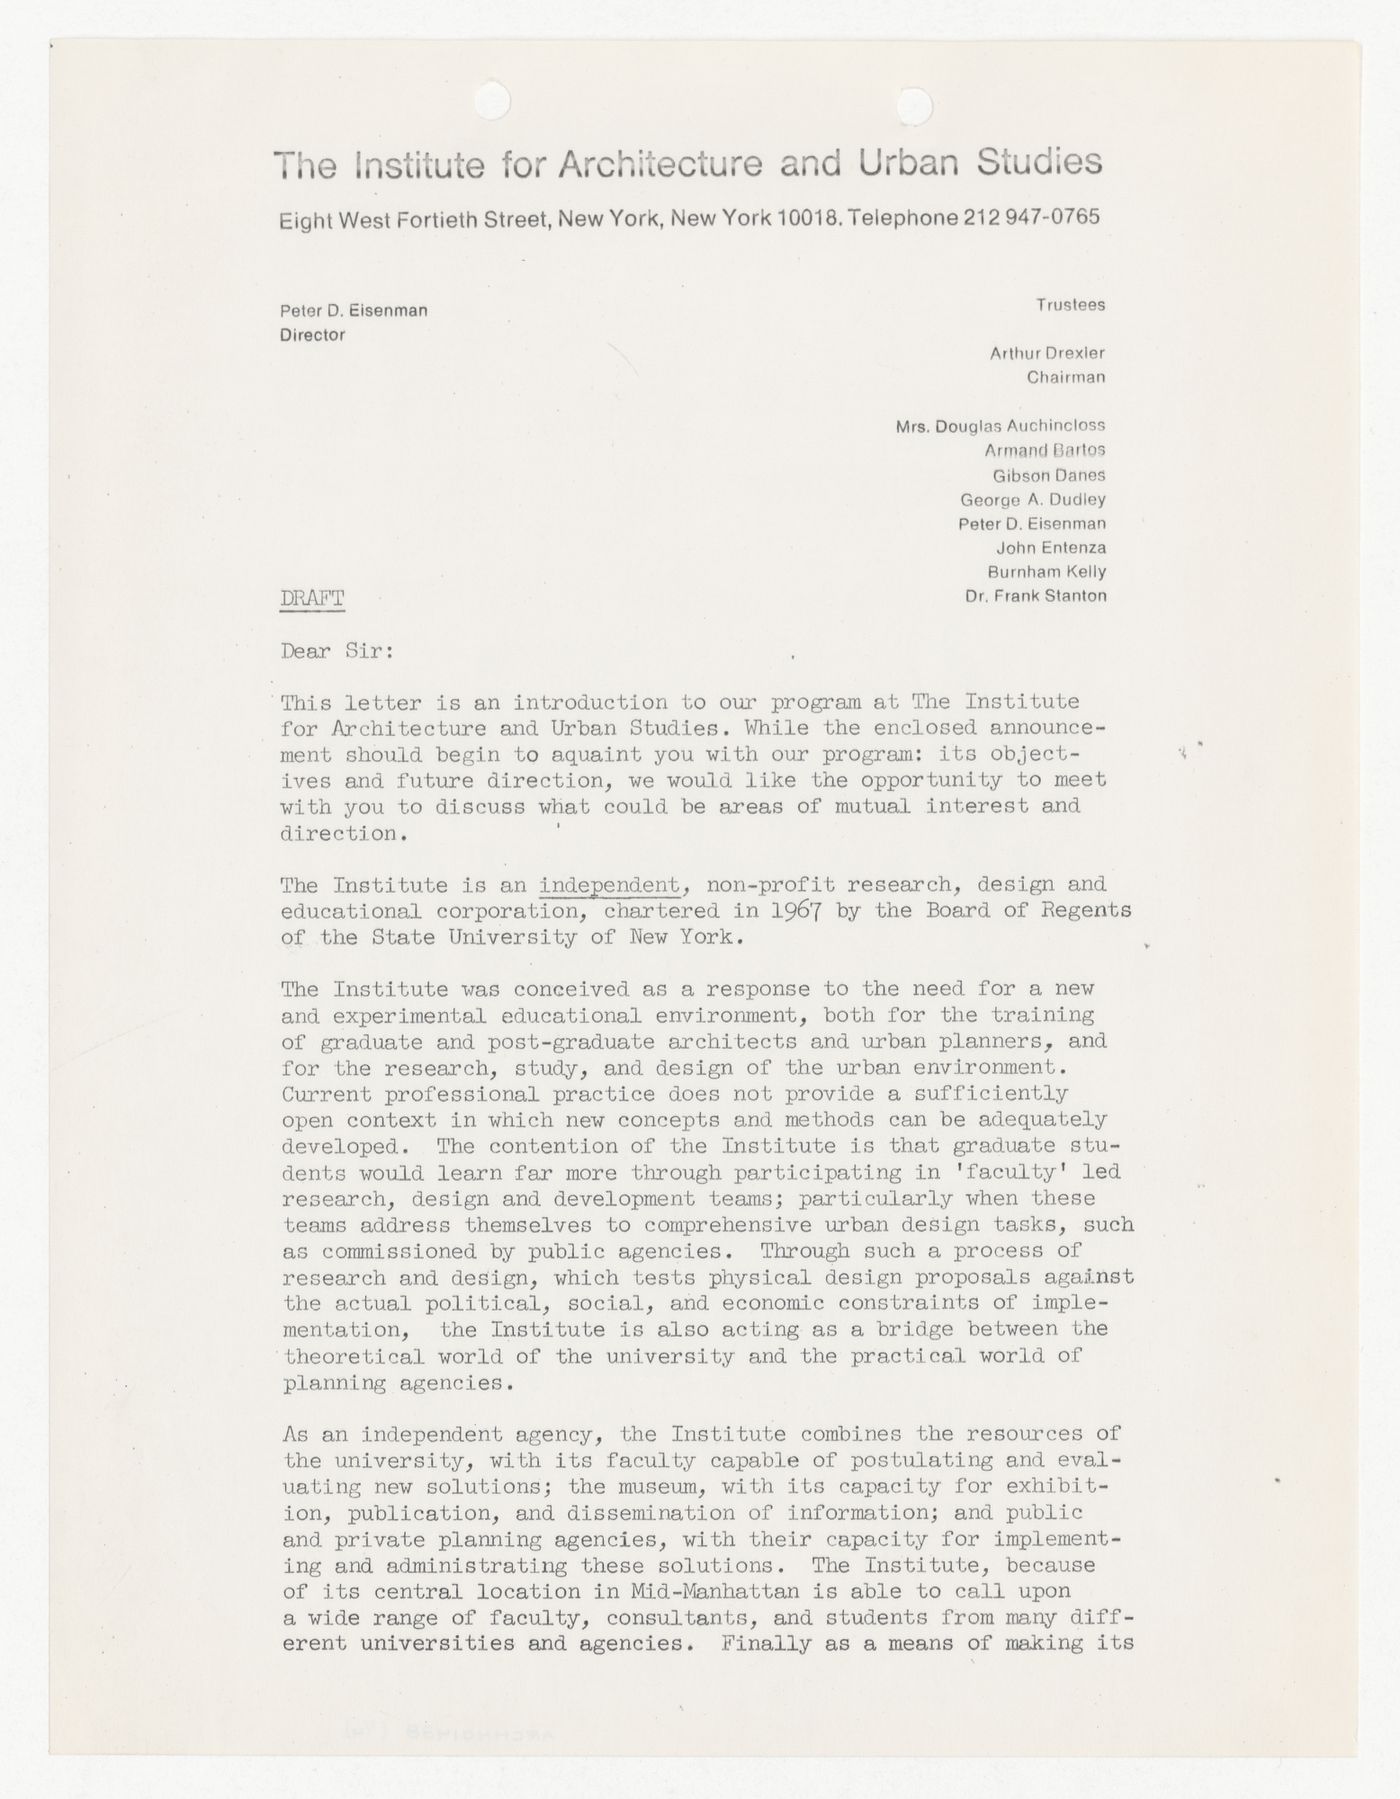 Draft letter for requesting donations including a brief overview of IAUS history and projects written by Peter D. Eisenman